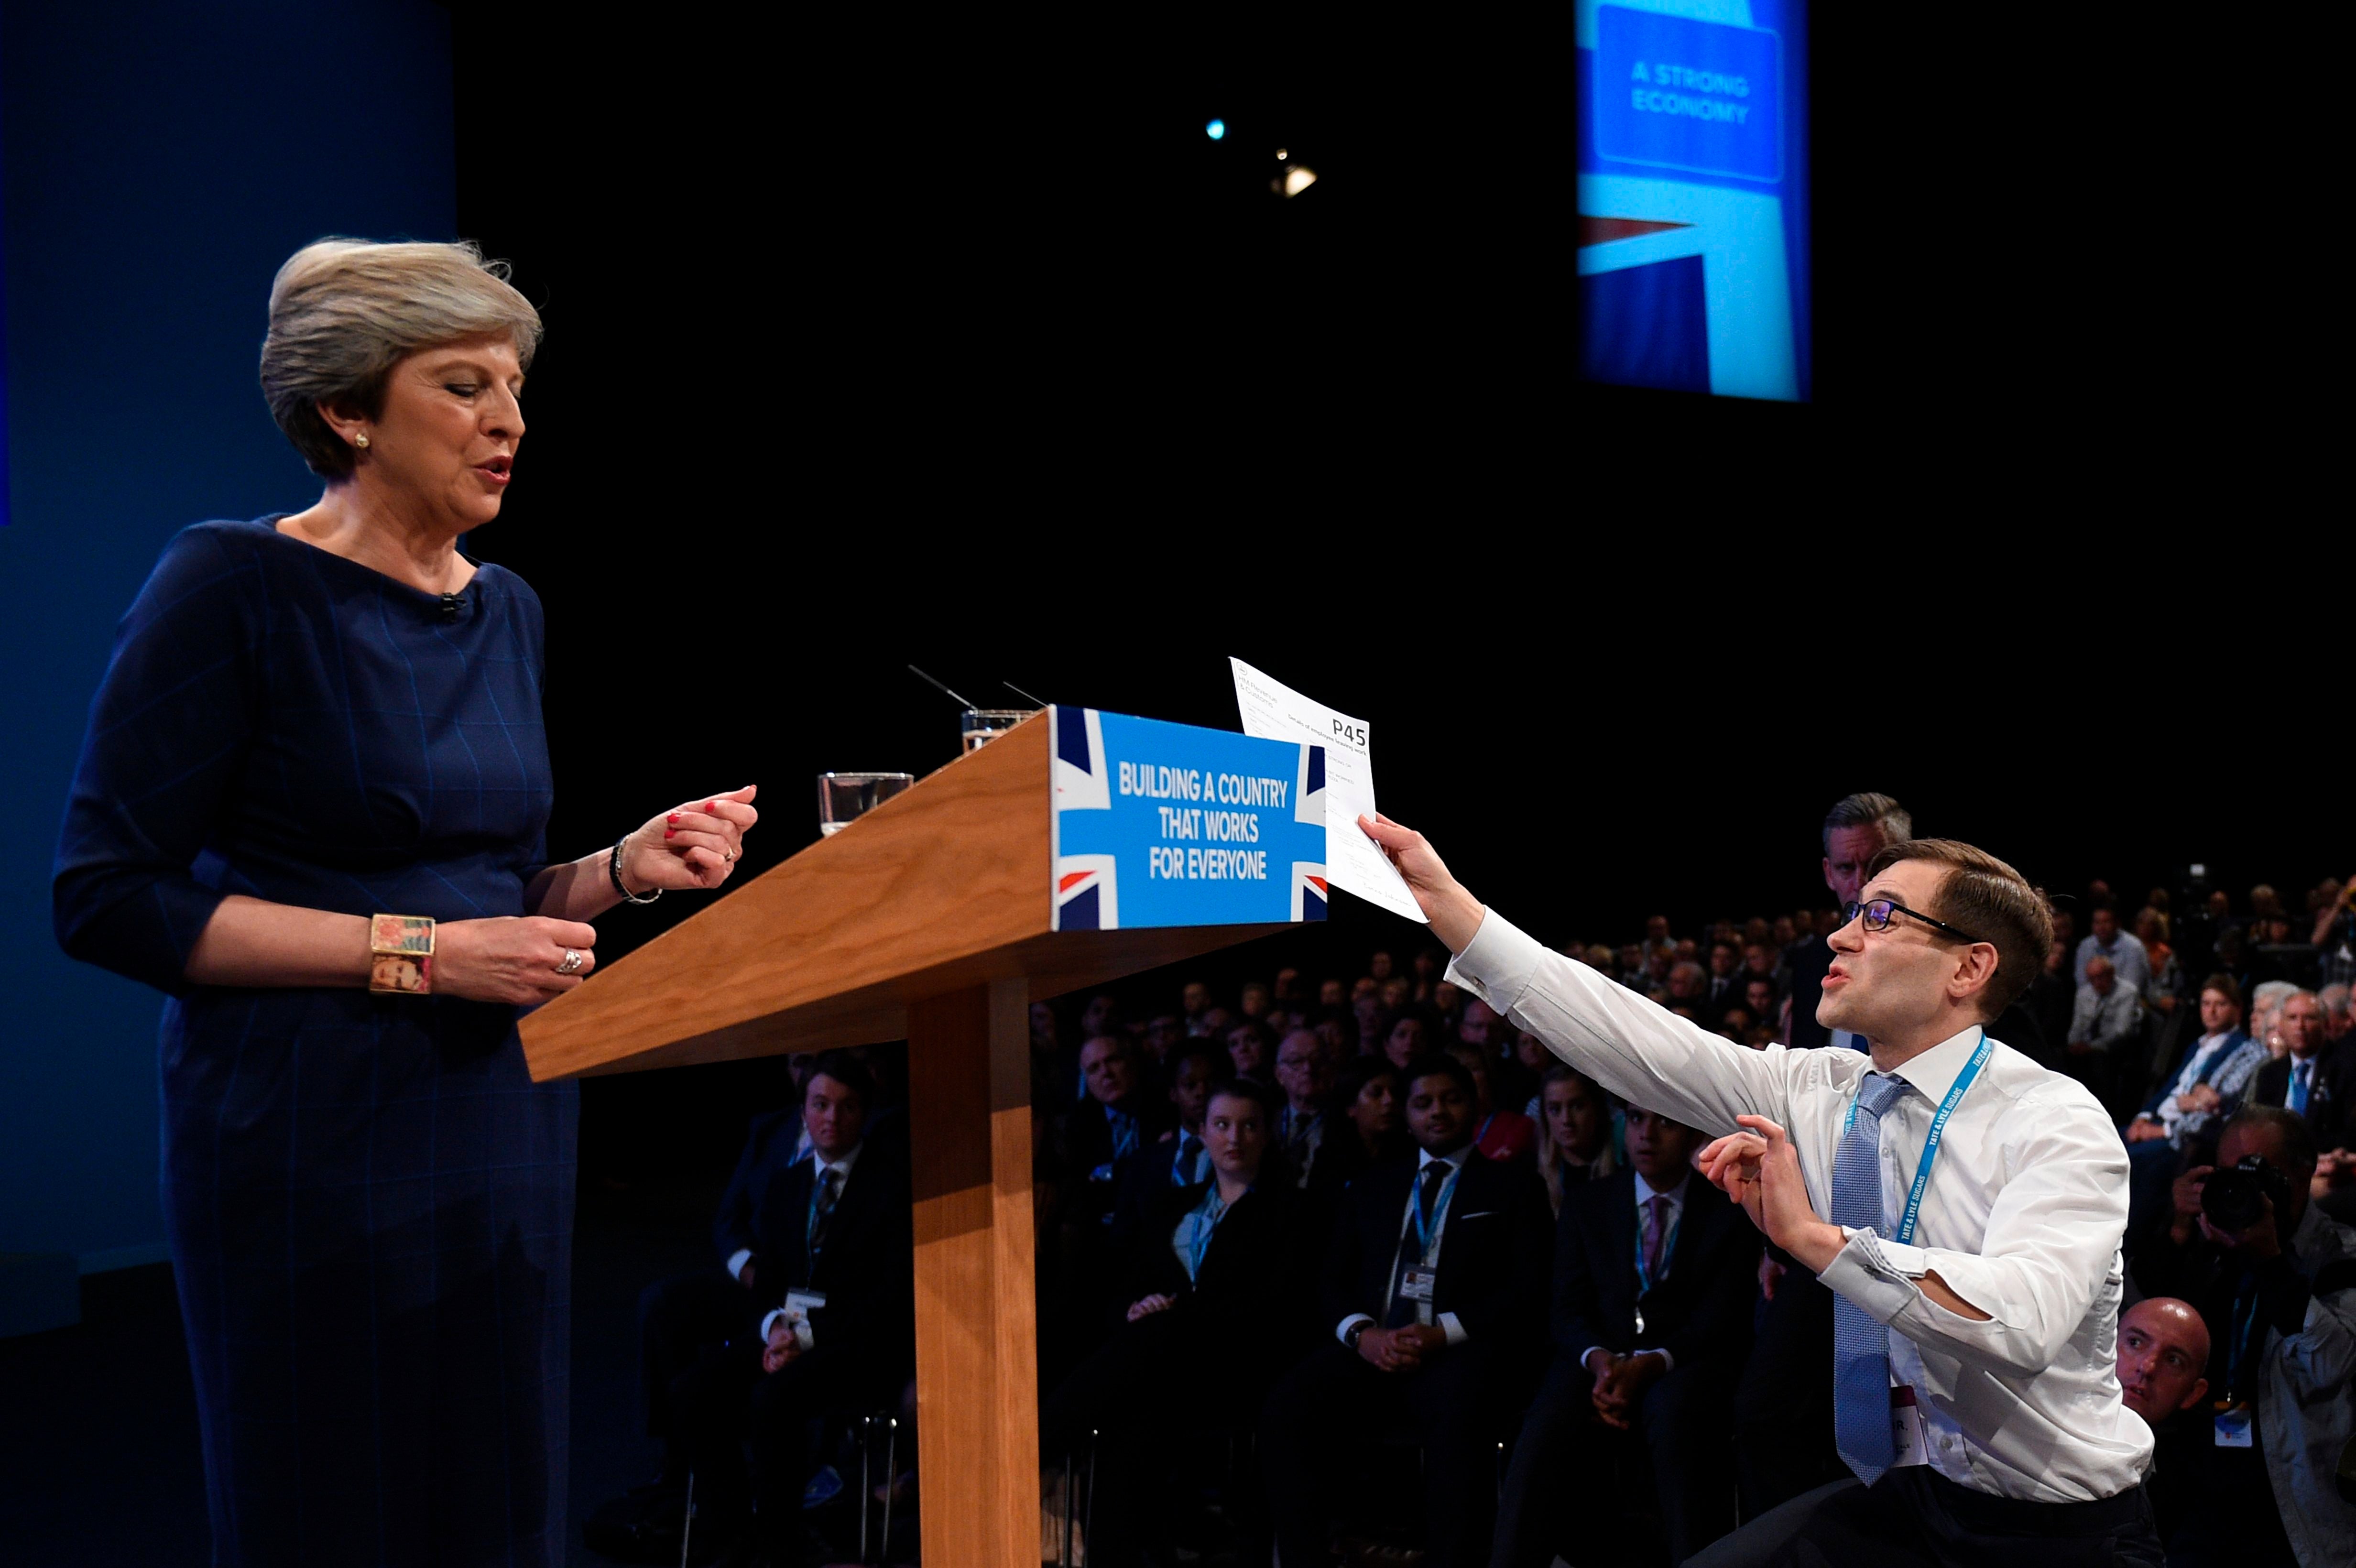 Handing Theresa May a P45 at the 2017 Conservative Party conference